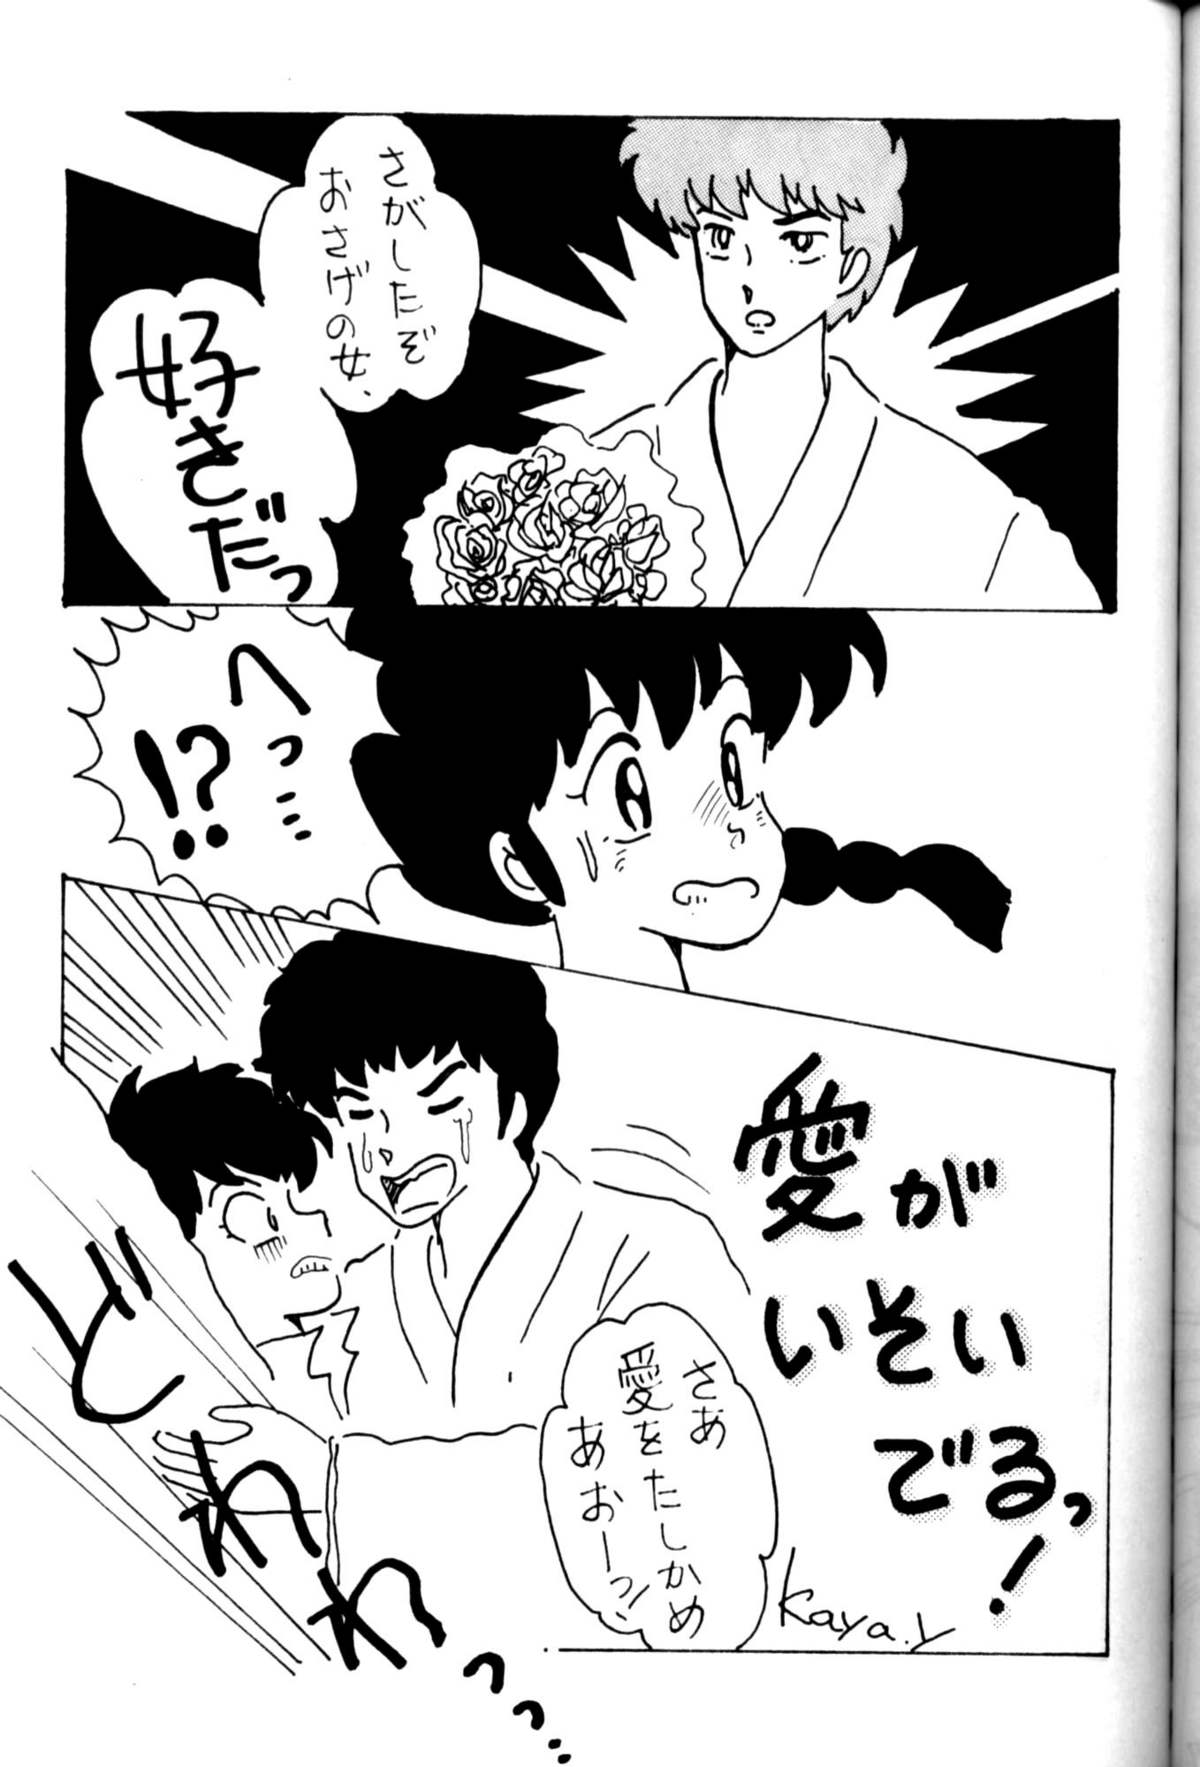 T You (Ranma 1/2) page 24 full